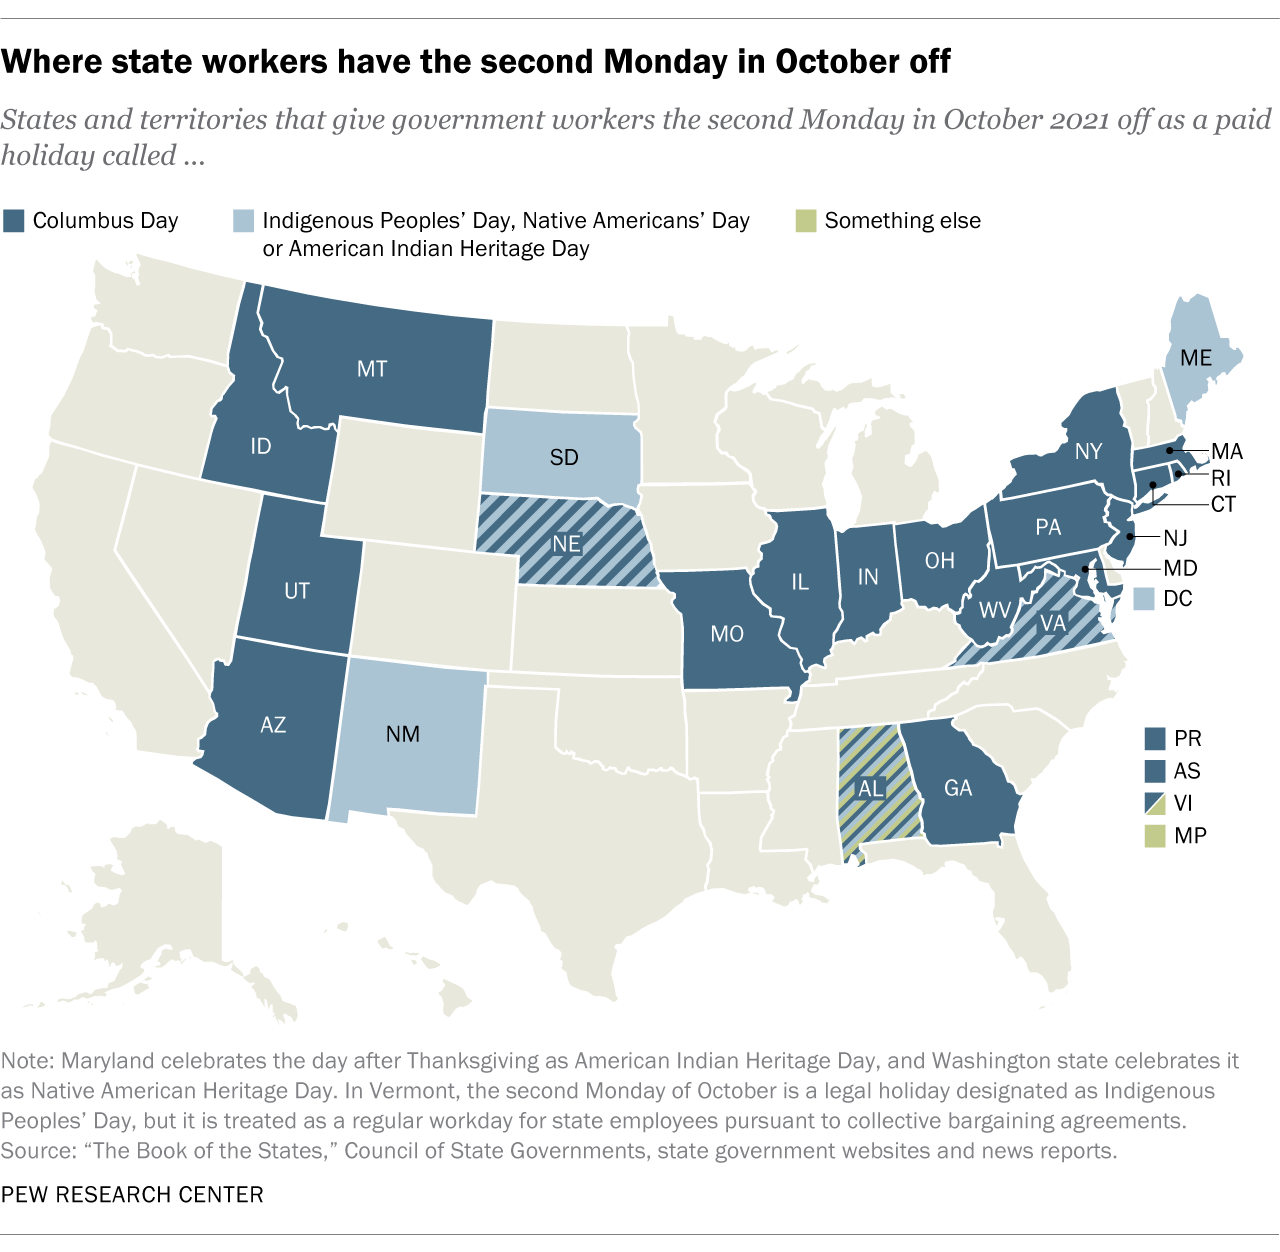 A chart showing where state workers have the second Monday in October off.